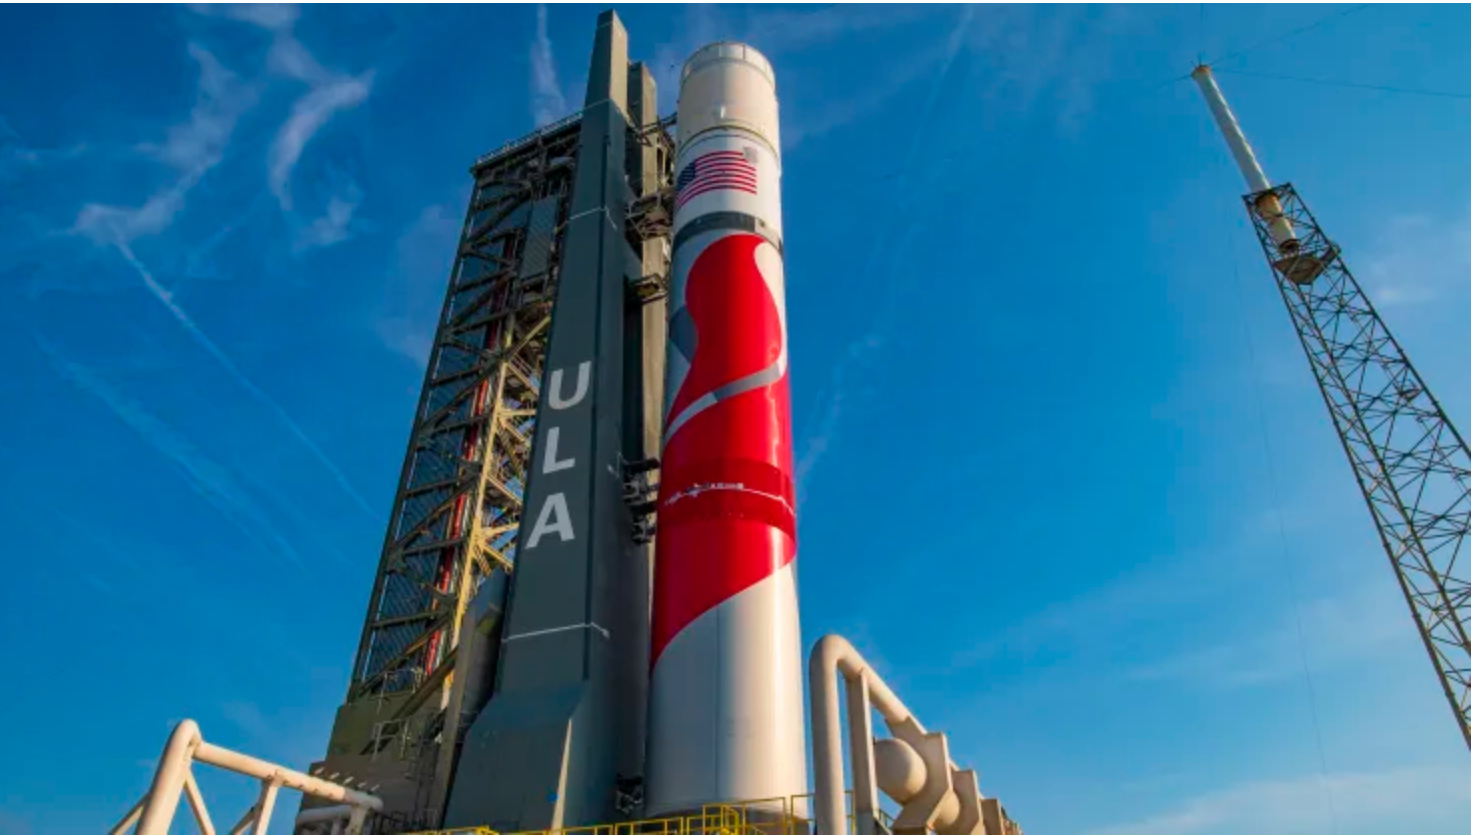 The Vulcan rocket for the Cert-1 mission stands at SLC-41 during testing in Cape Canaveral, Florida, on May 12, 2023. Credit ULA